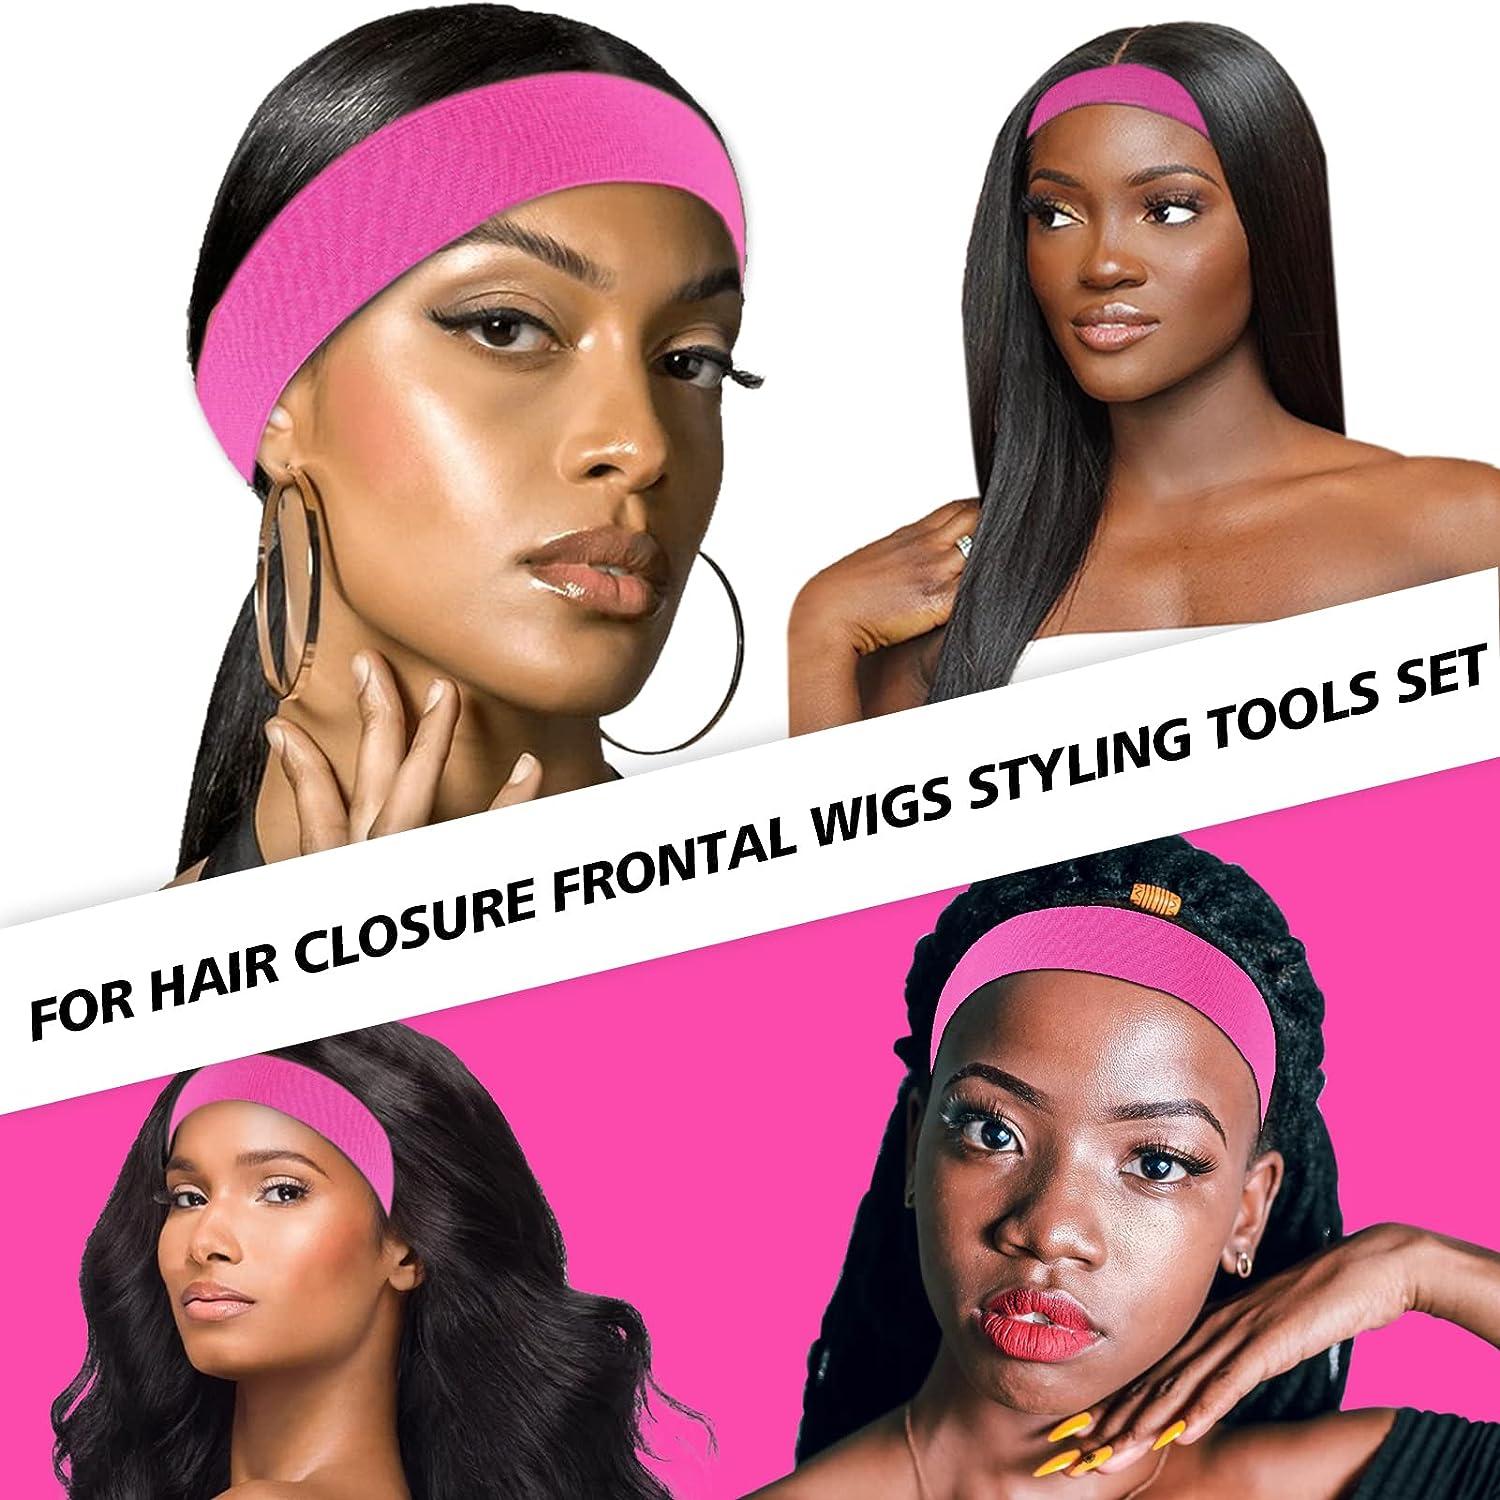 Wig Installation Kit For Lace Front Wigs Everything To Lay A Wig